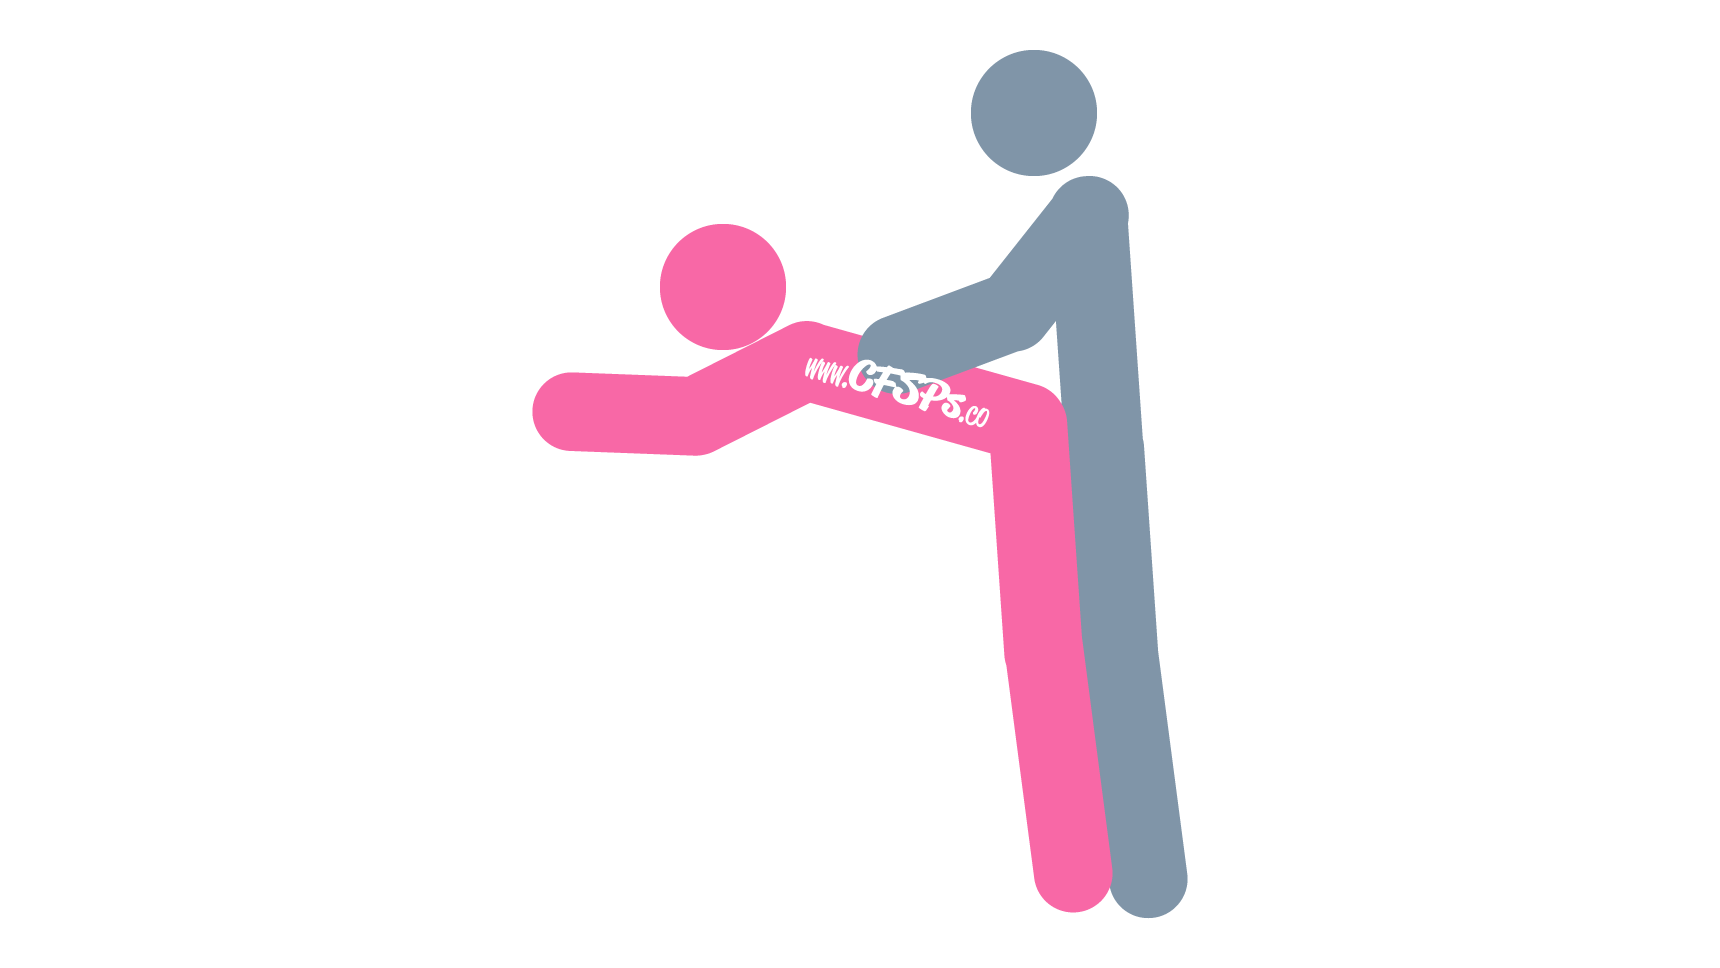 An illustration of the Lube Tube Manual Stimulation Position. This picture demonstrates how Lube Tube is a standing, from behind manual stimulation position and technique that stimulates his penis and her clitoris during foreplay.